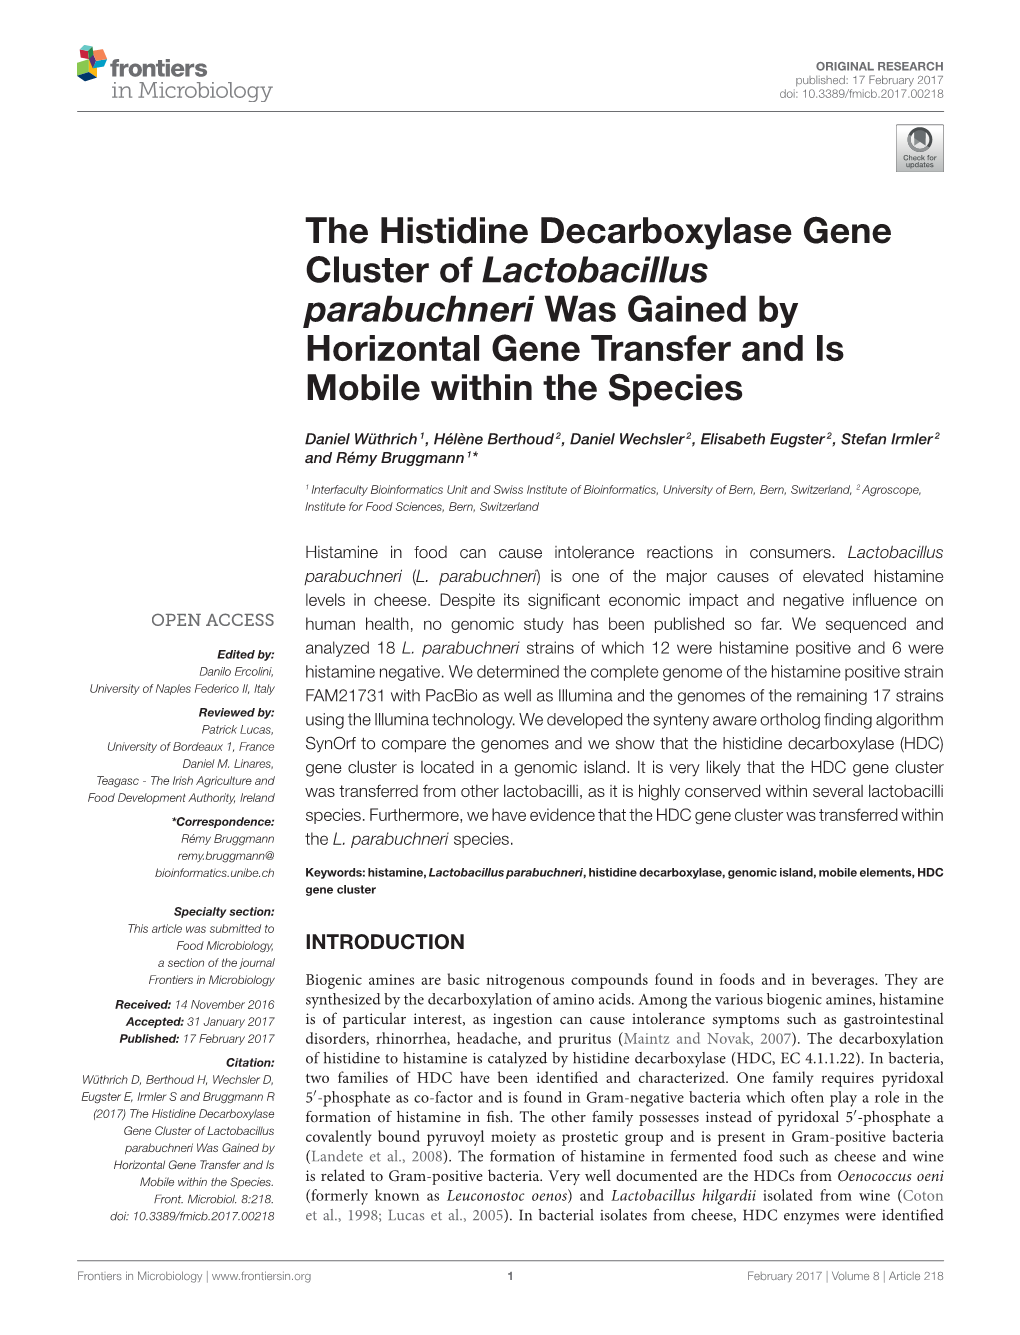 The Histidine Decarboxylase Gene Cluster of Lactobacillus Parabuchneri Was Gained by Horizontal Gene Transfer and Is Mobile Within the Species